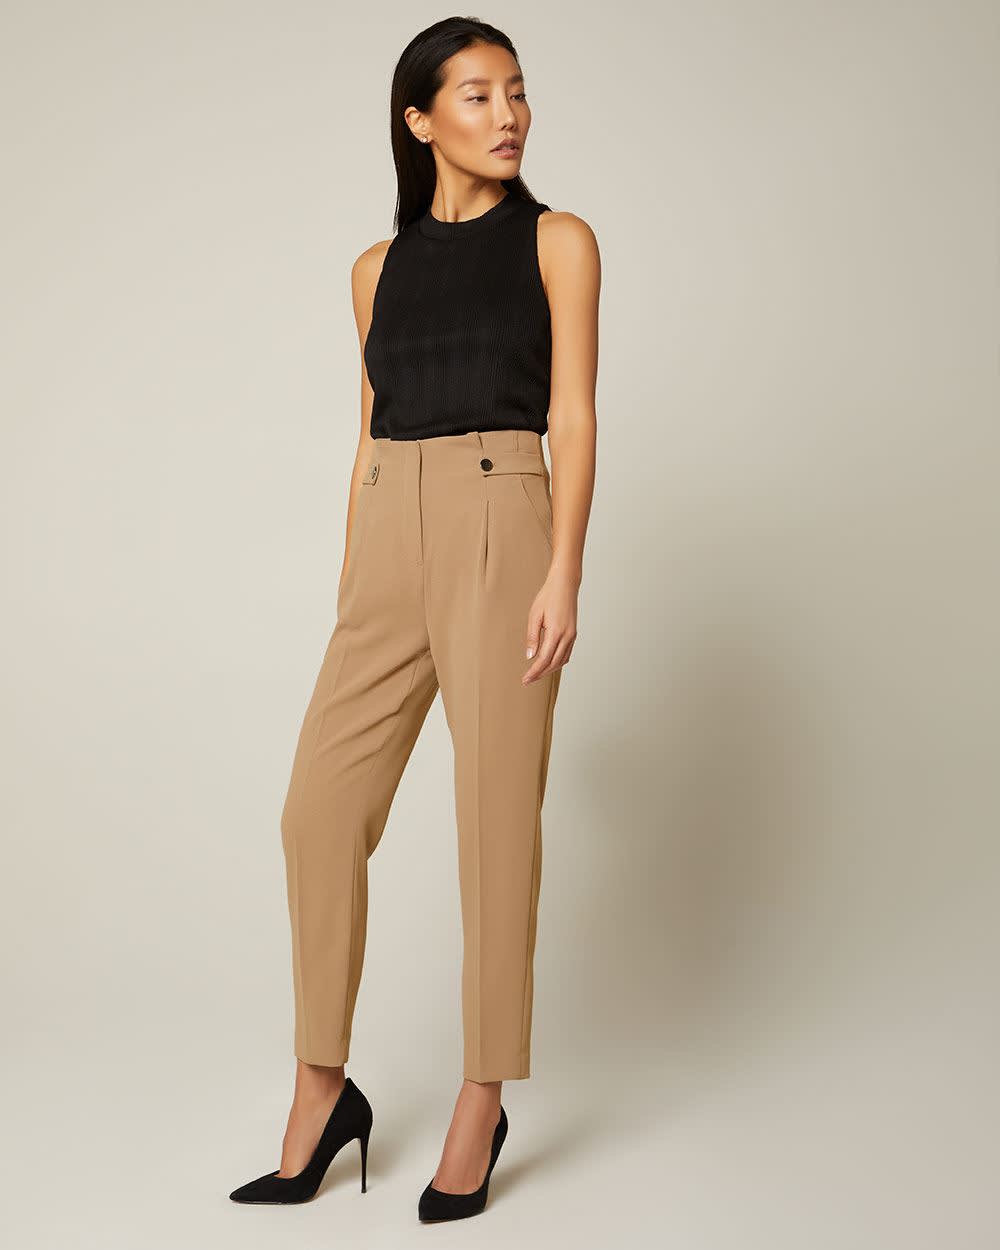 Buttoned High-waist pleated pant | RW&CO.